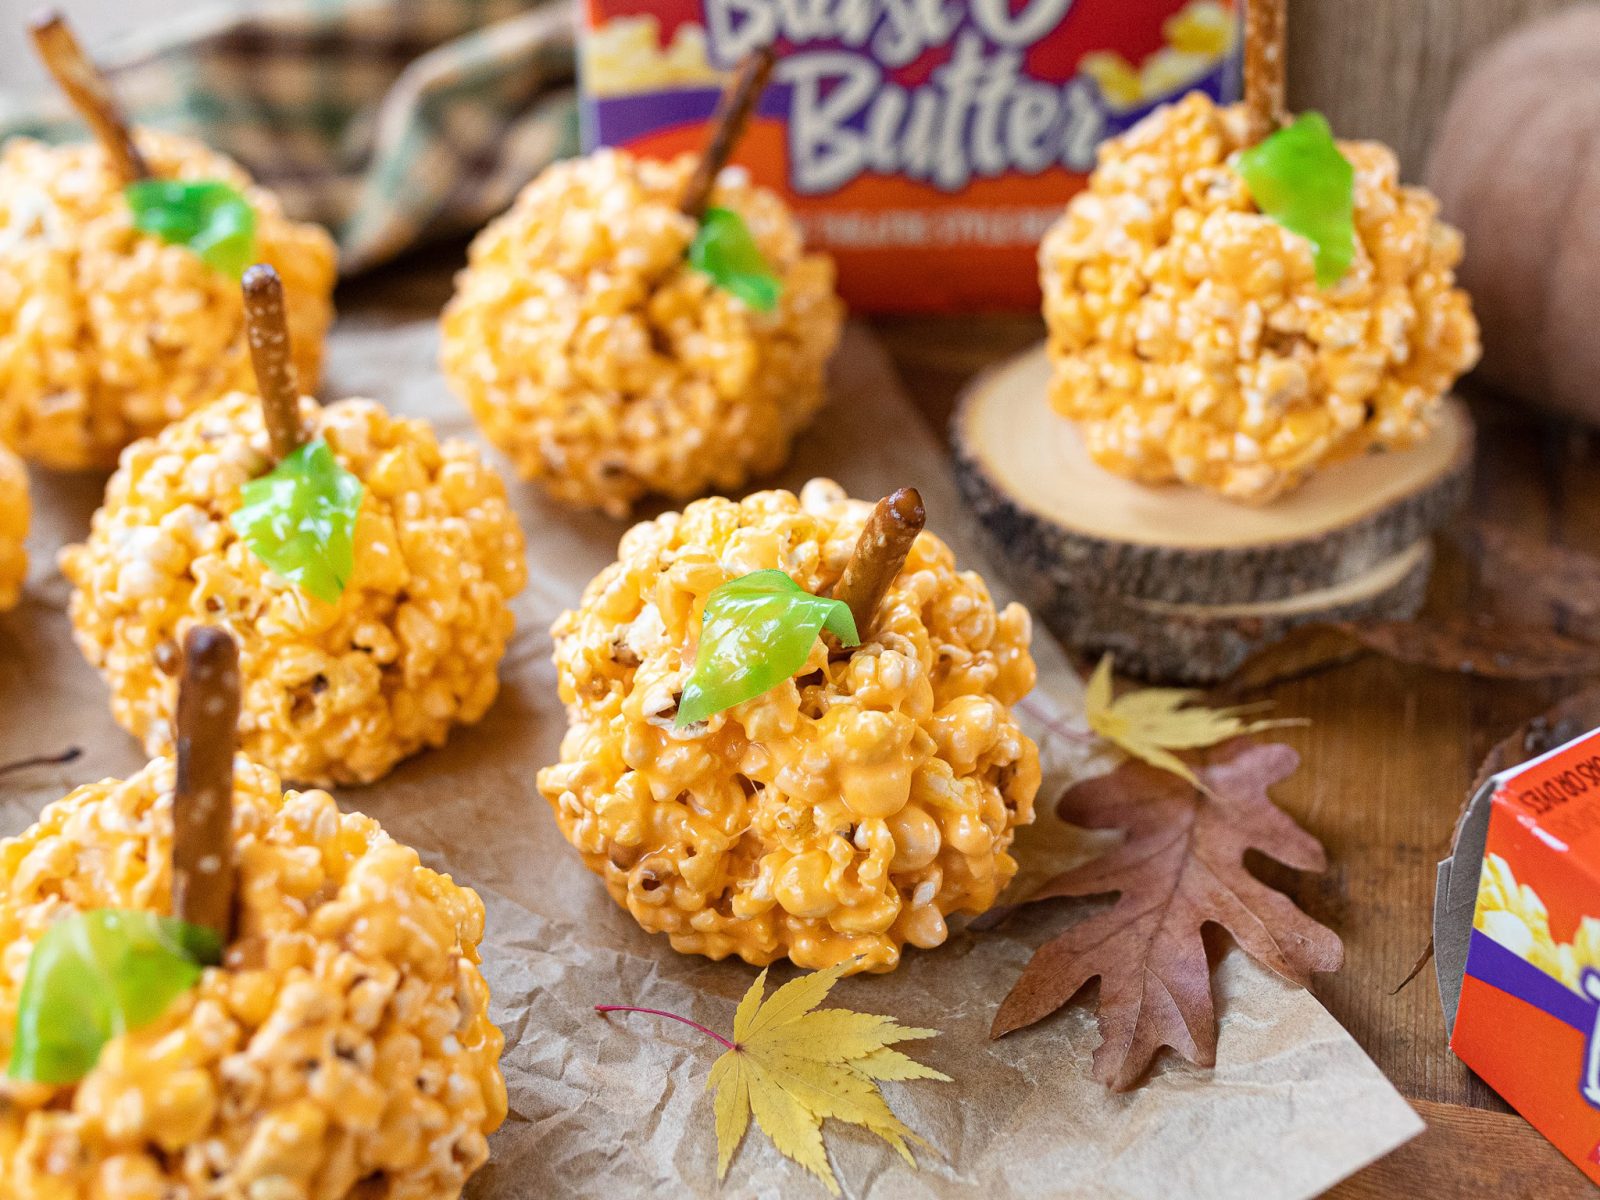 Make These Delicious Pumpkin Popcorn Ball Treats With JOLLY TIME Pop Corn This Thanksgiving